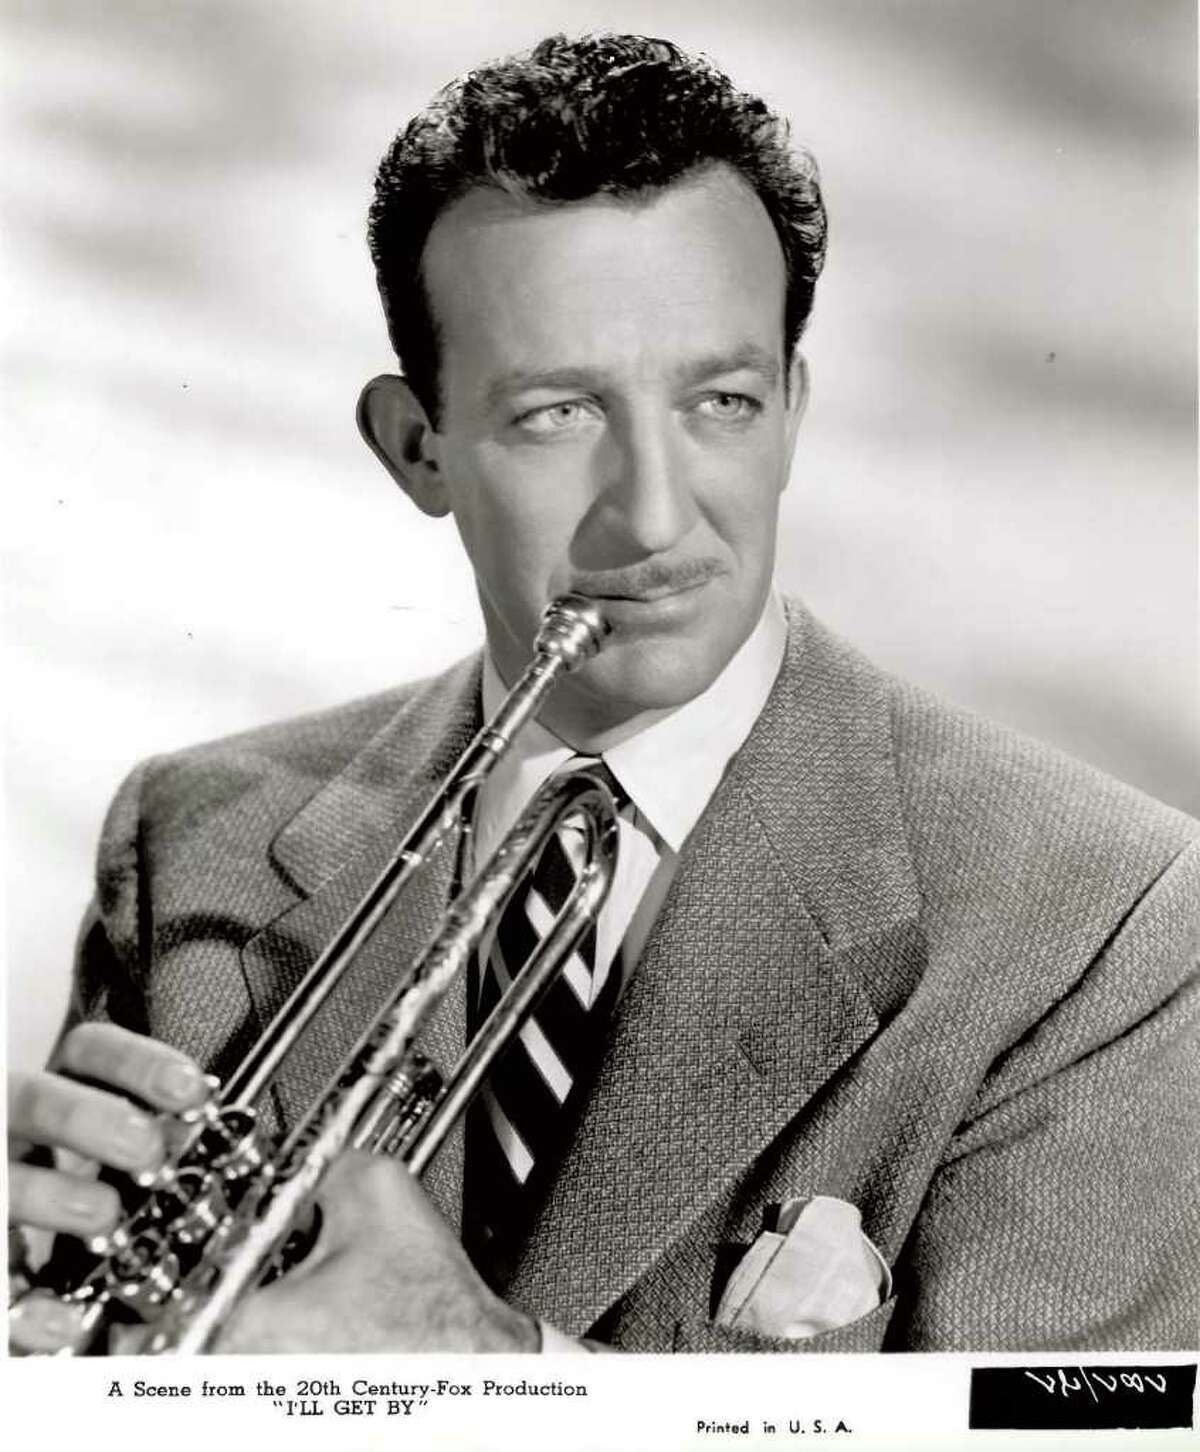 Harry James played in Beaumont school bands, according to the Museum of the Gulf Coast. (Courtesy photo)